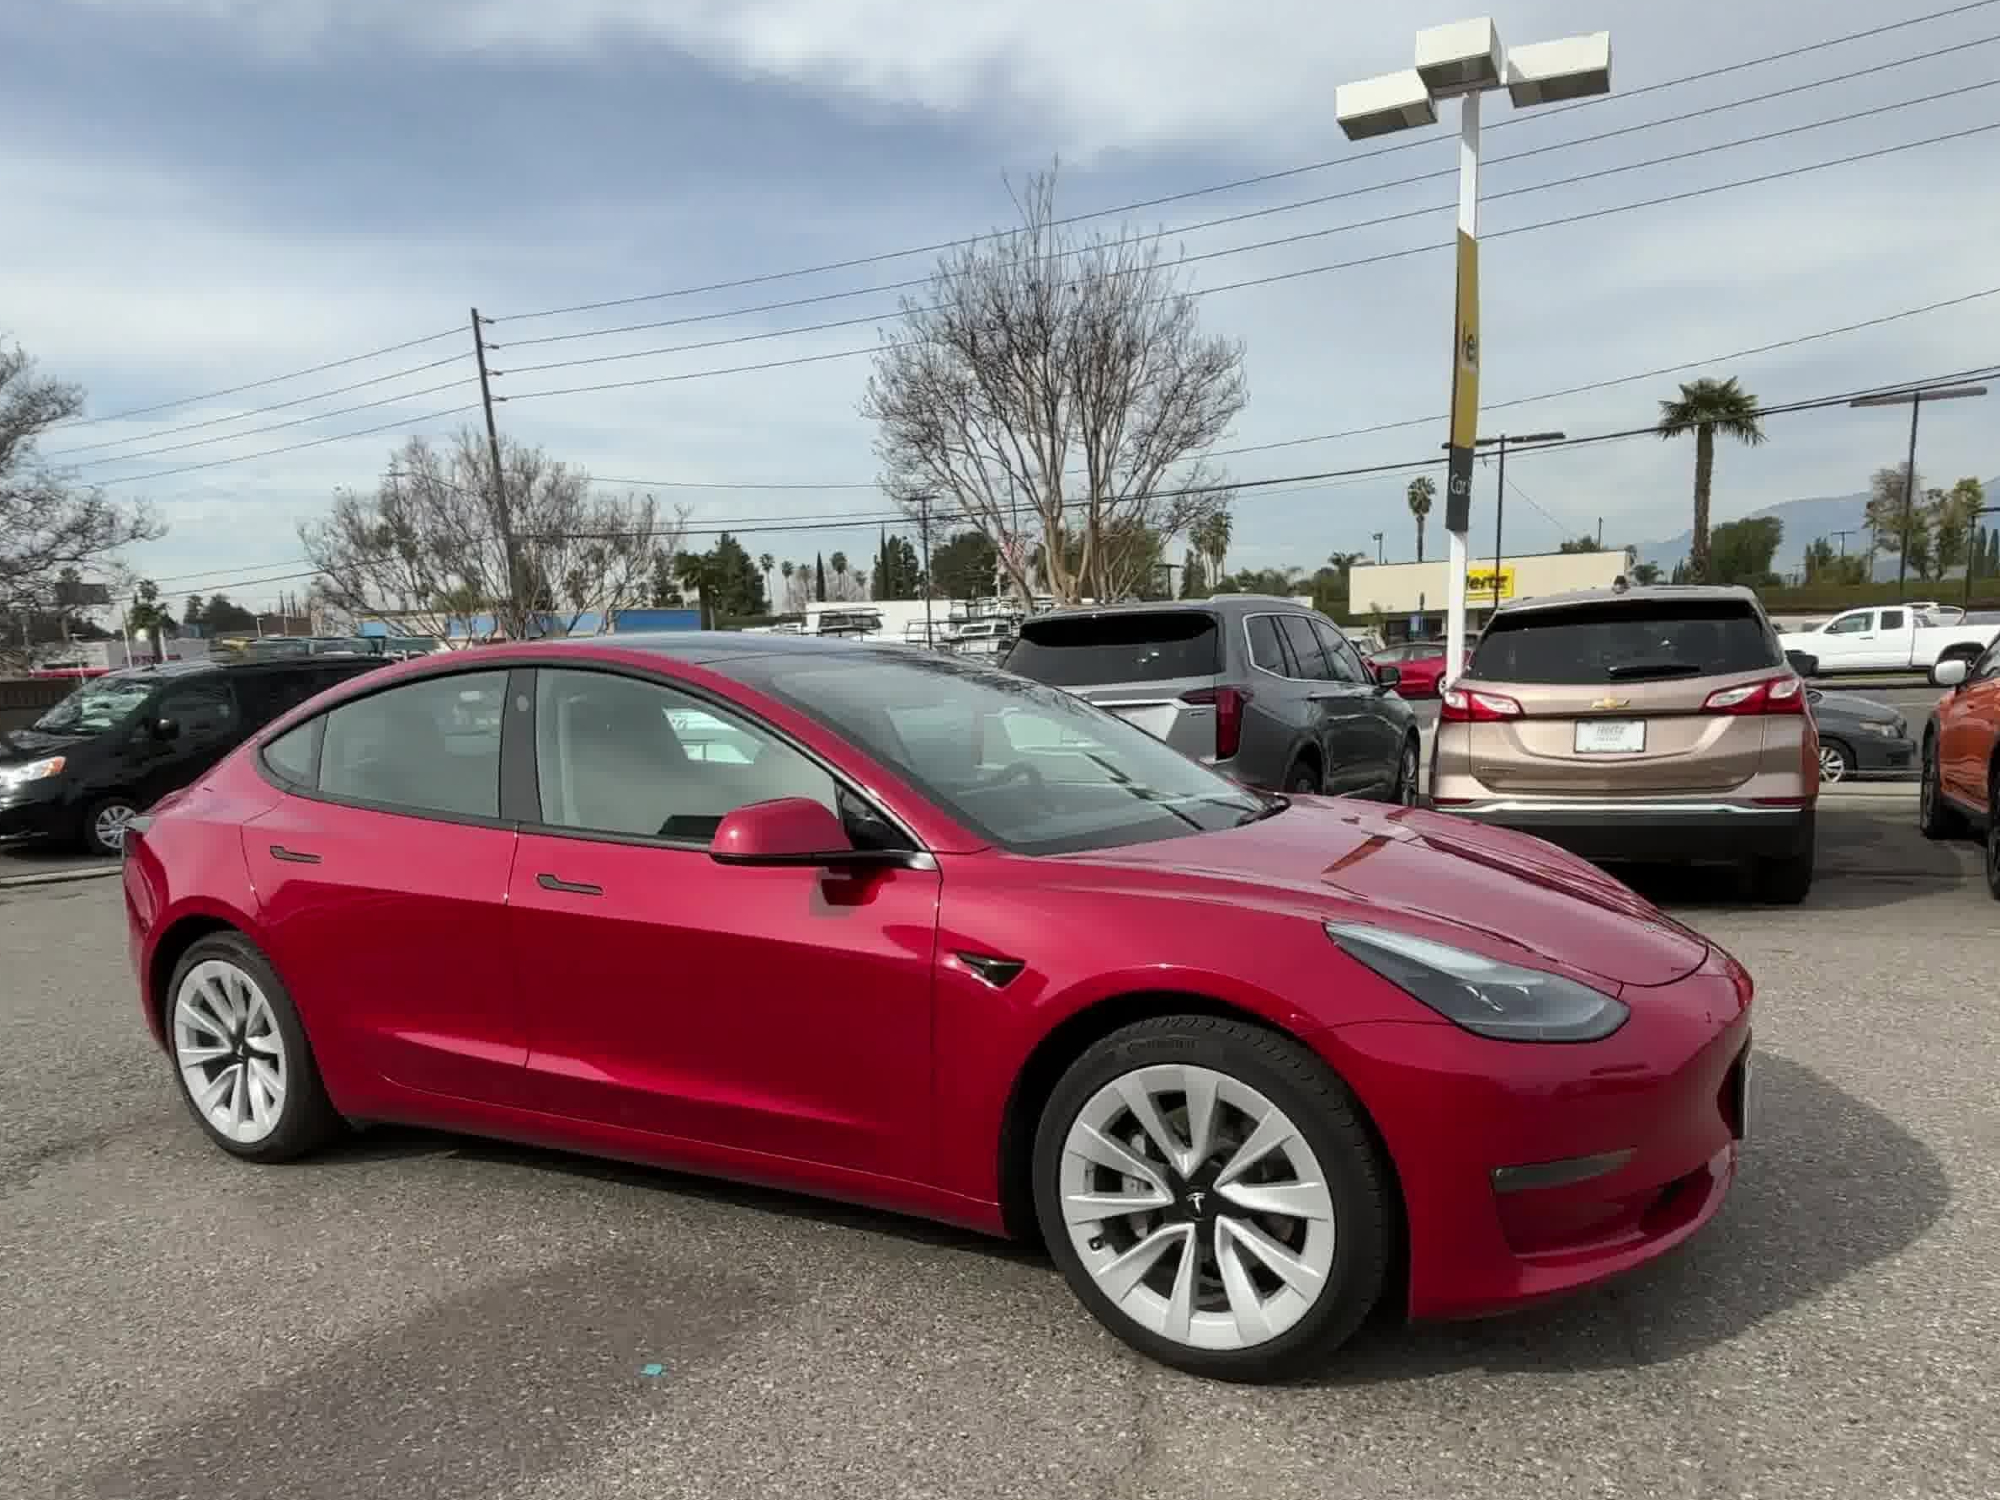 Hertz is unloading Tesla Model 3 vehicles for cheap - here's why you should  avoid buying one - The Manual